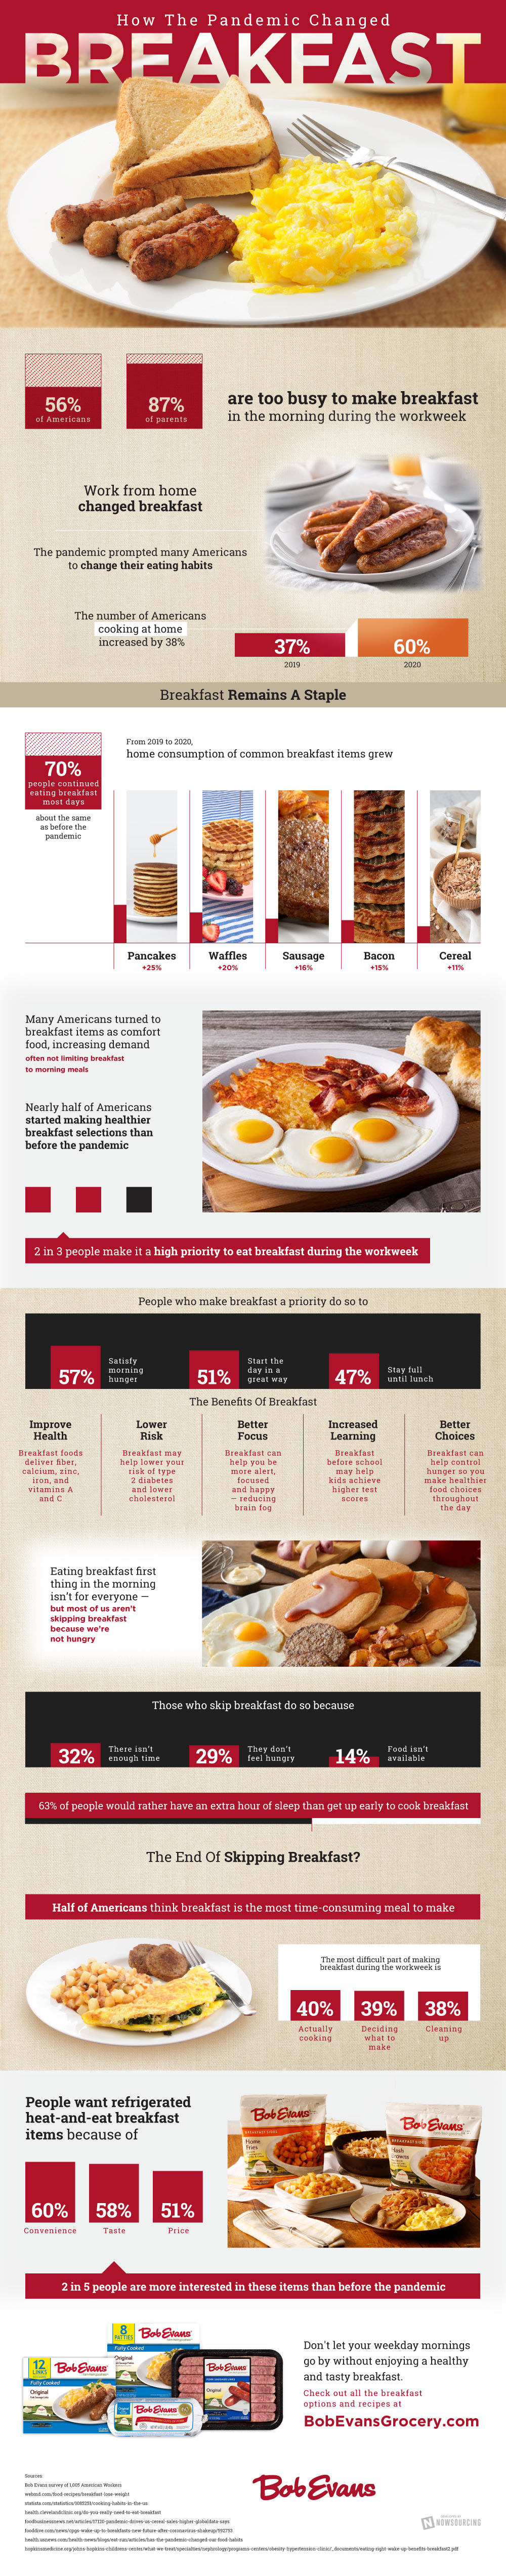 How The Pandemic Changed Breakfast In America - Infographic